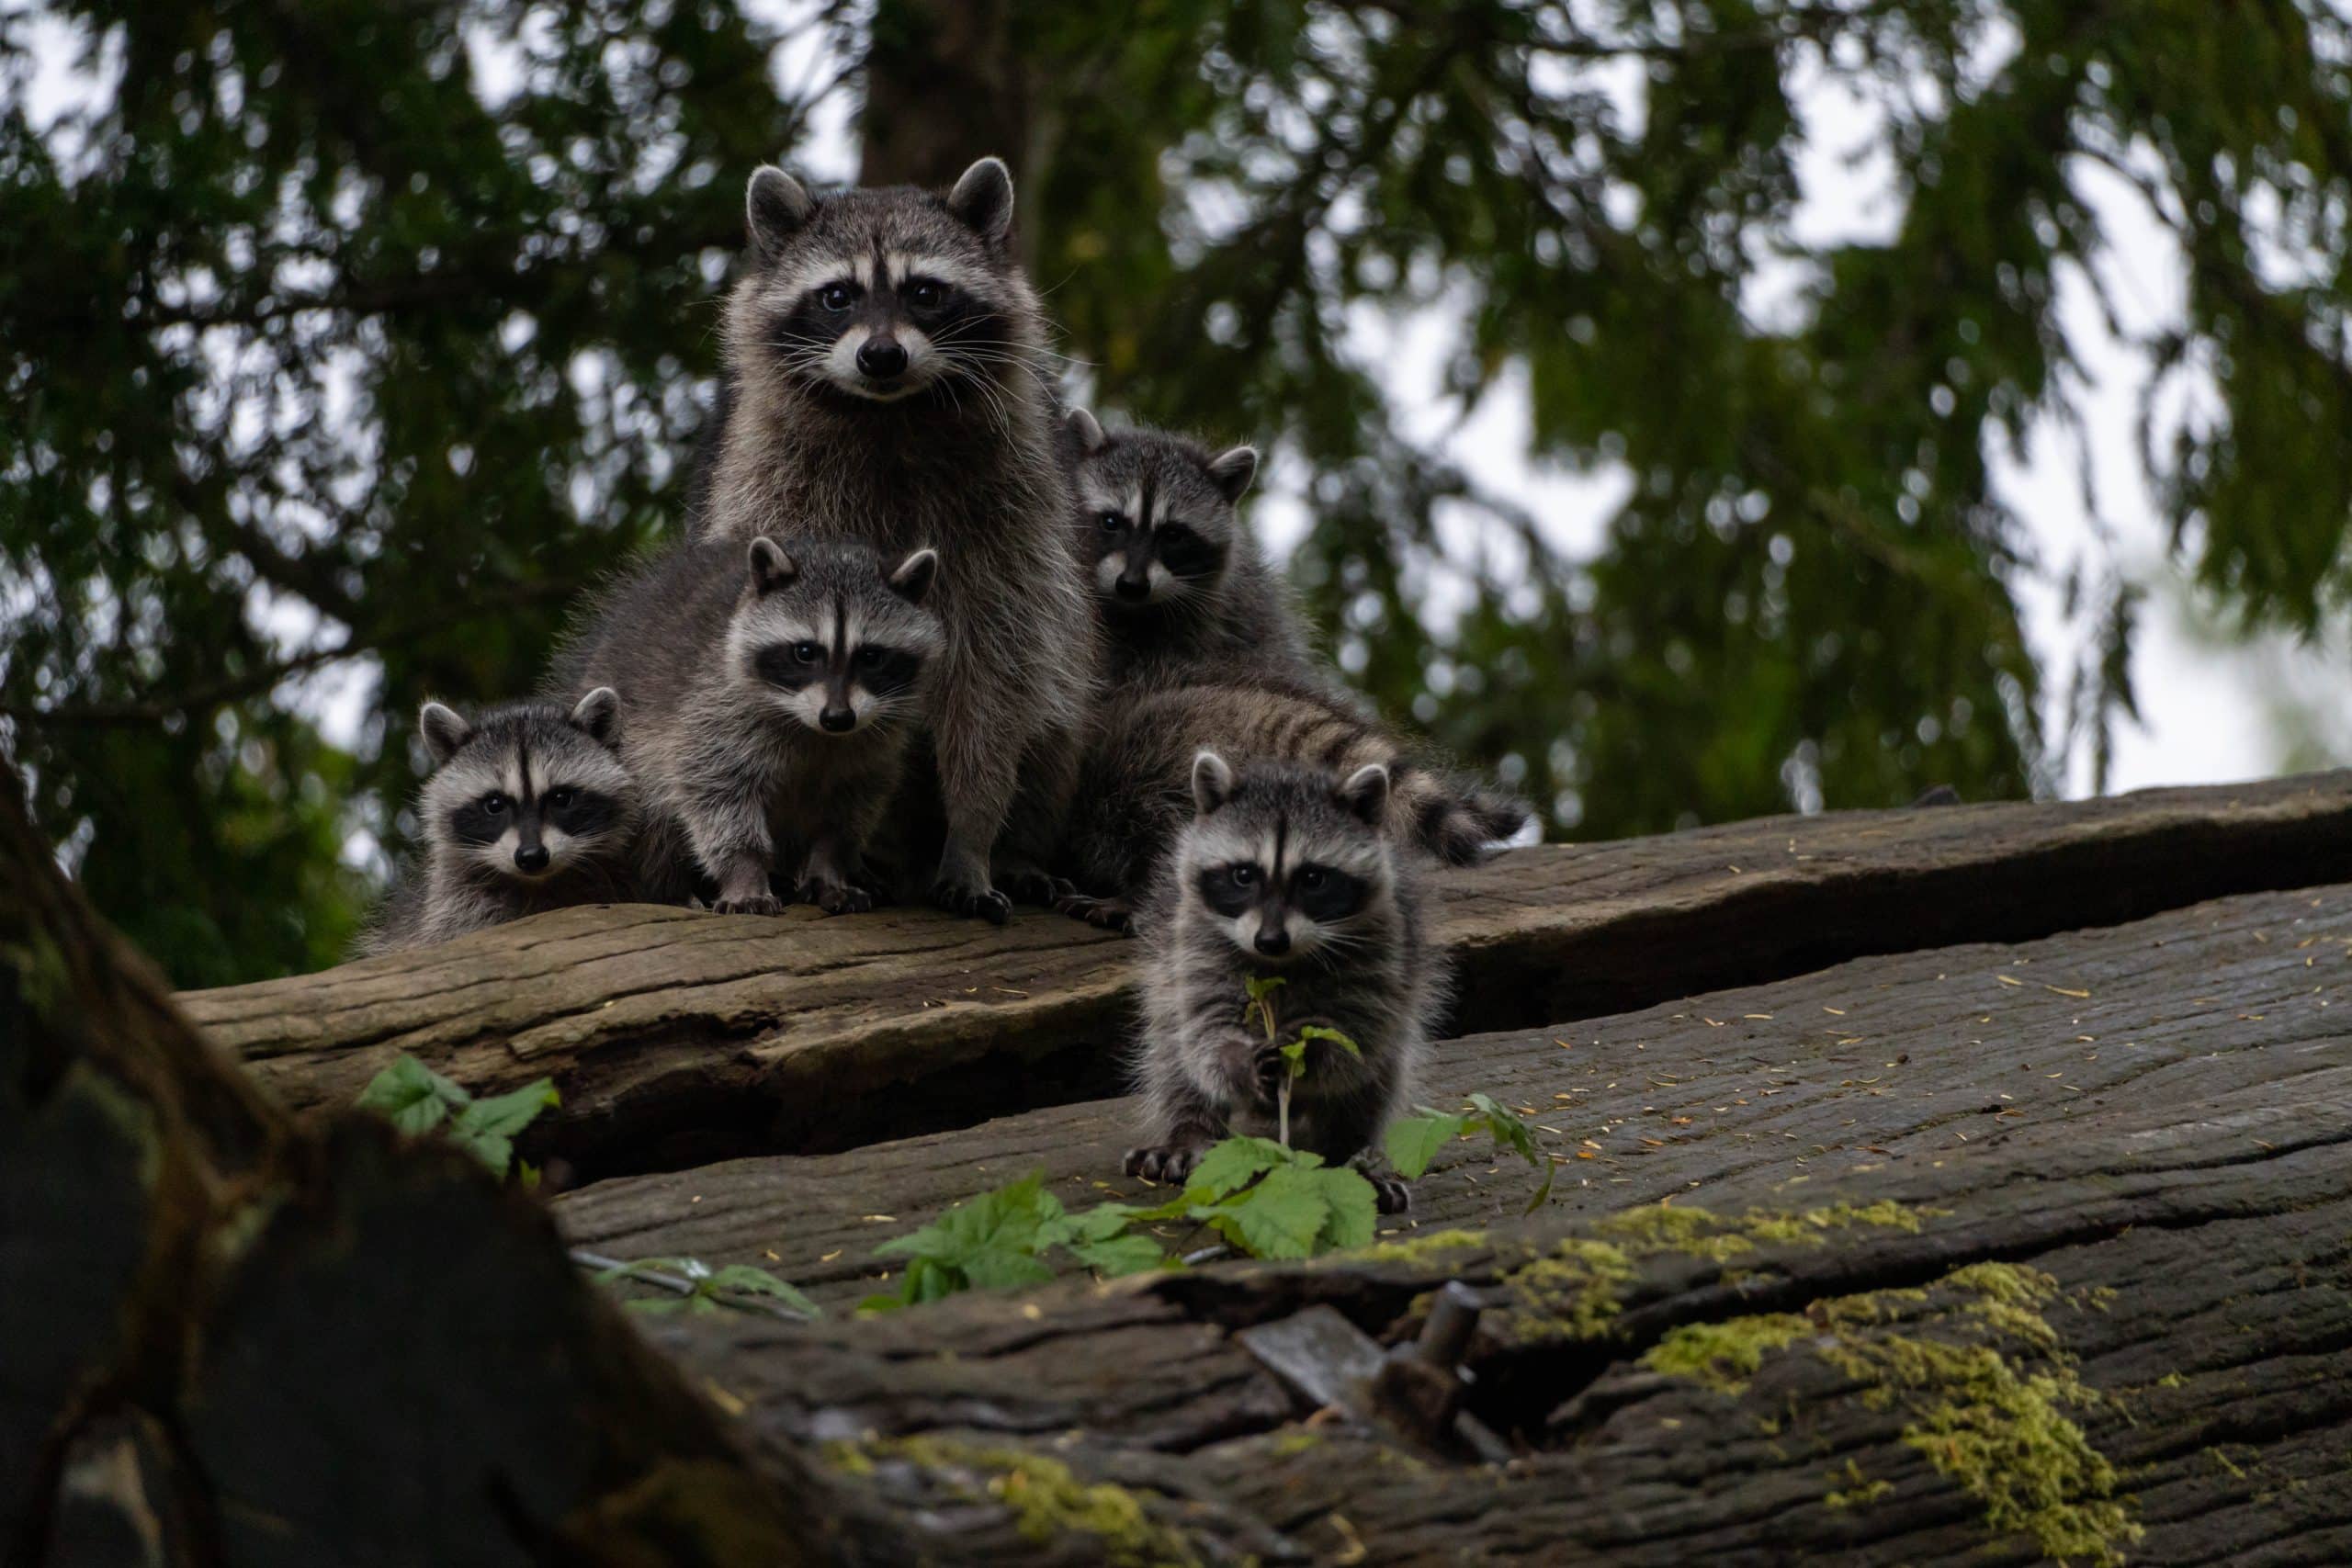 What are raccoons' babies called?